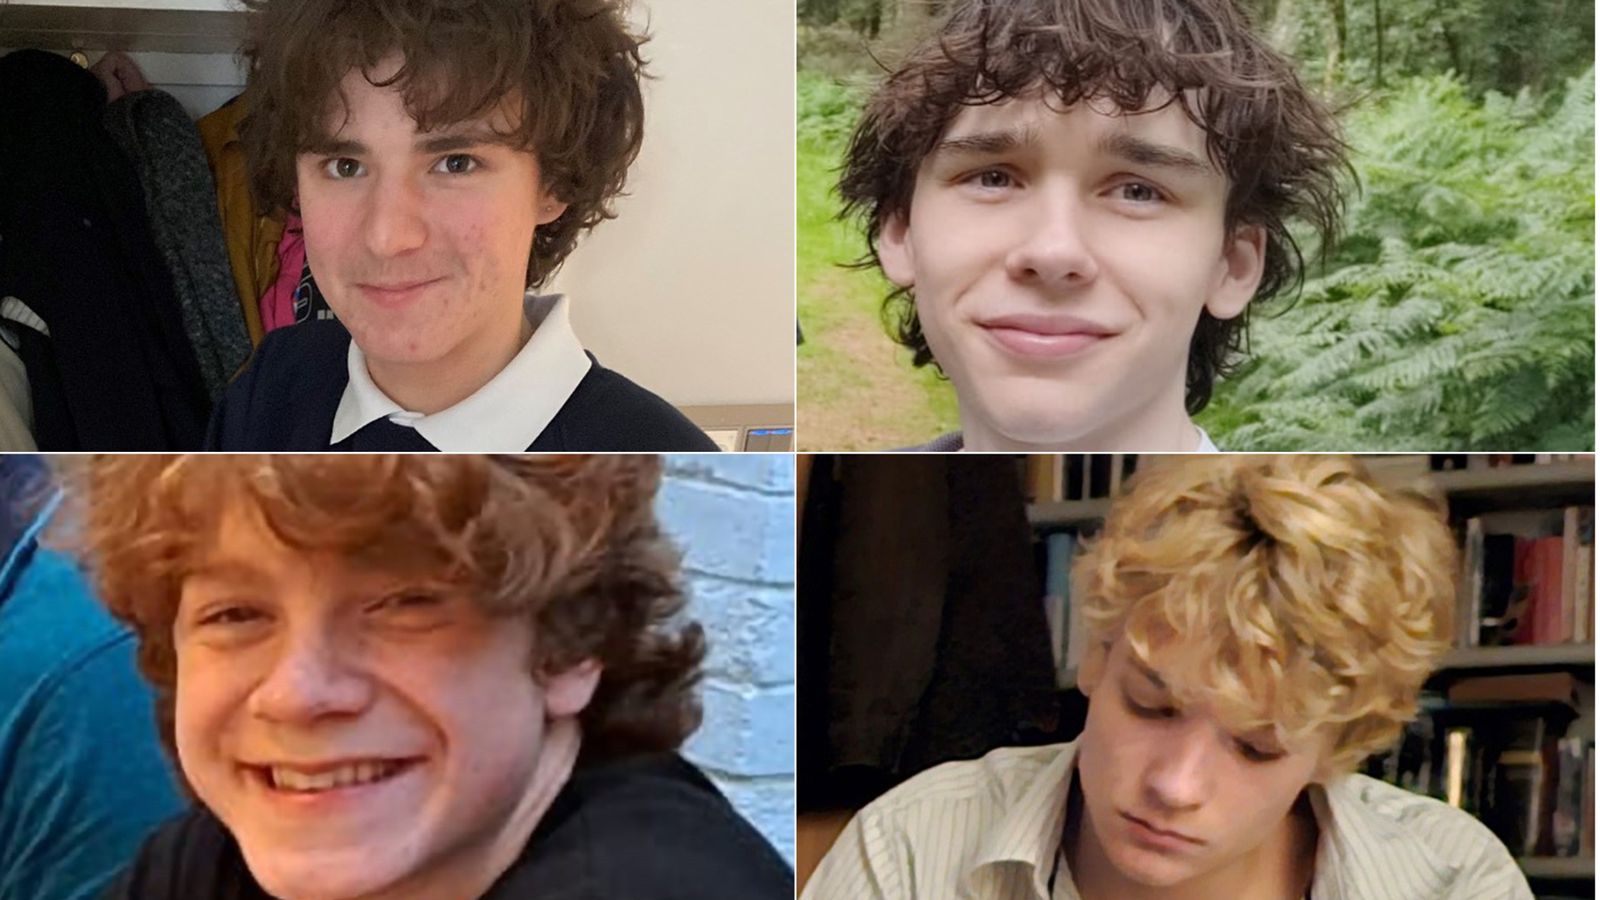 Missing teenagers' bodies were found in upturned car partially submerged in water